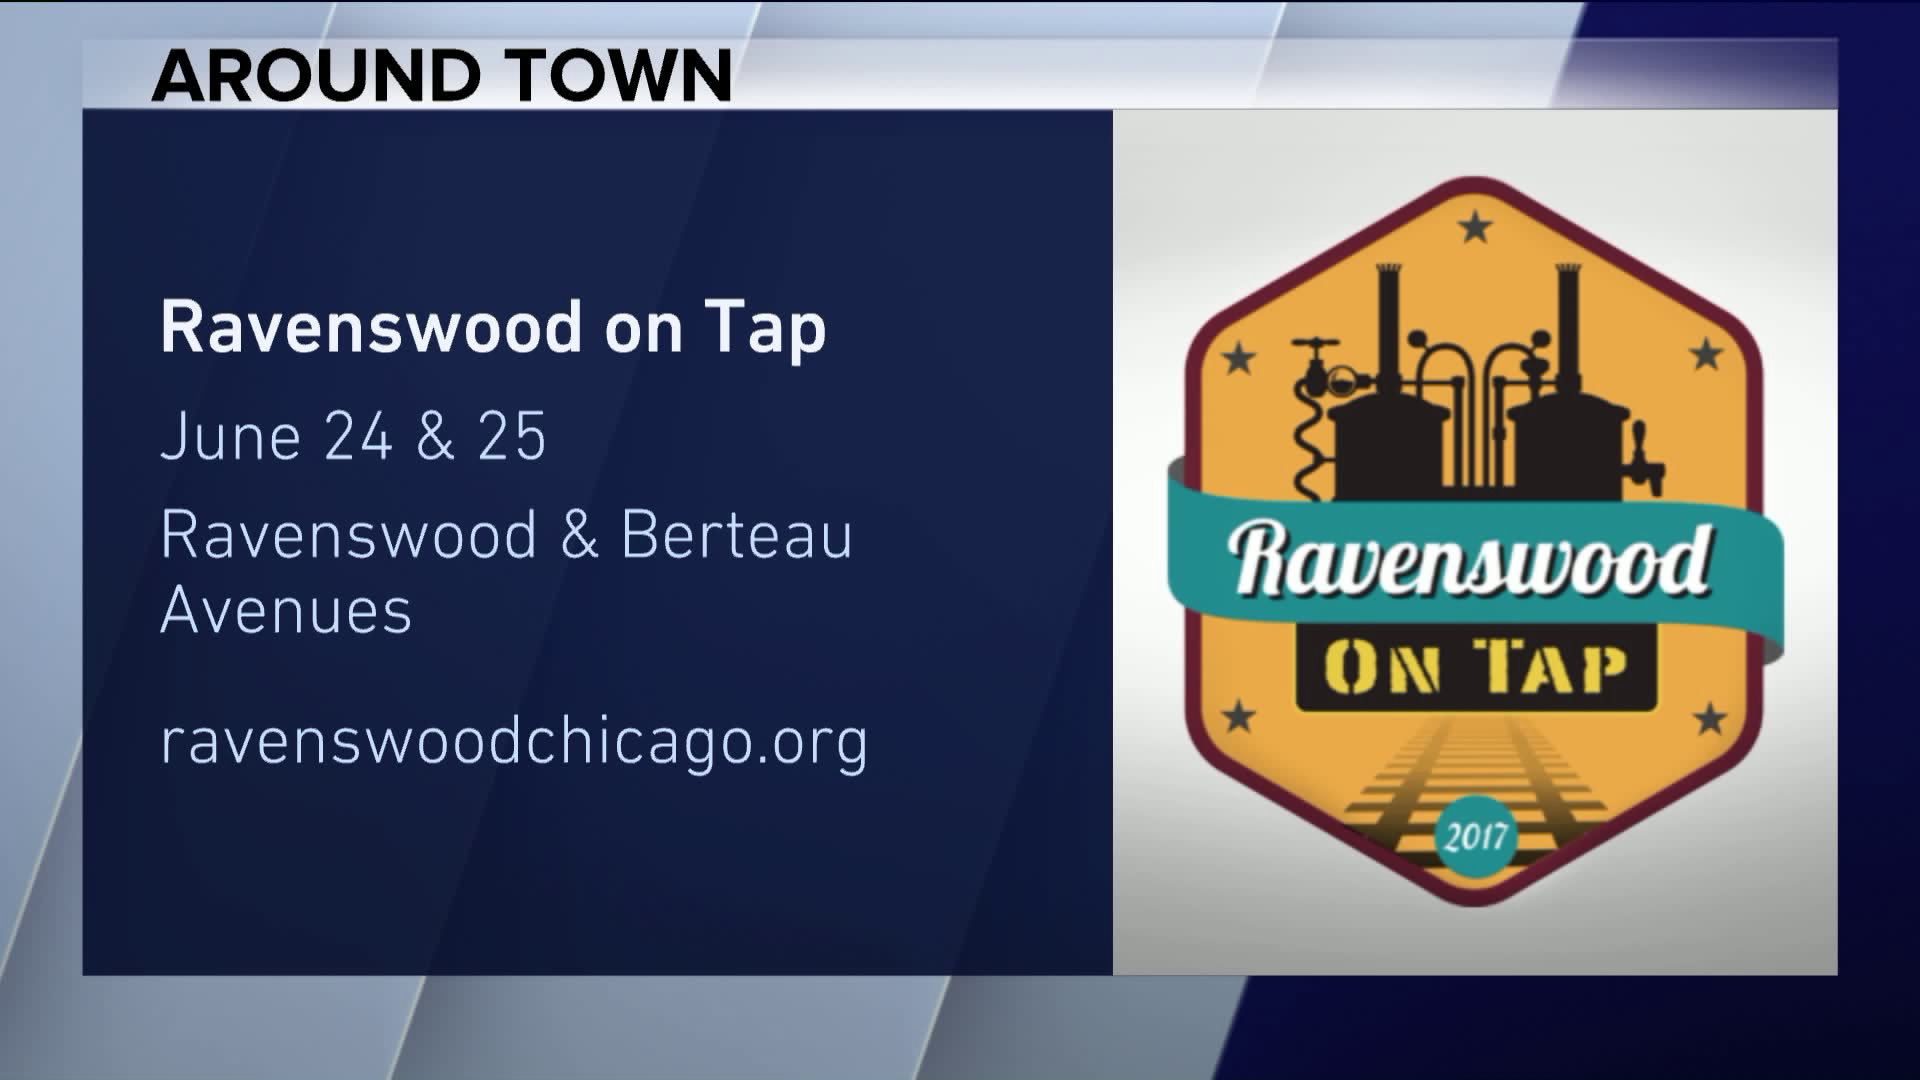 Around Town check out Ravenswood Tap